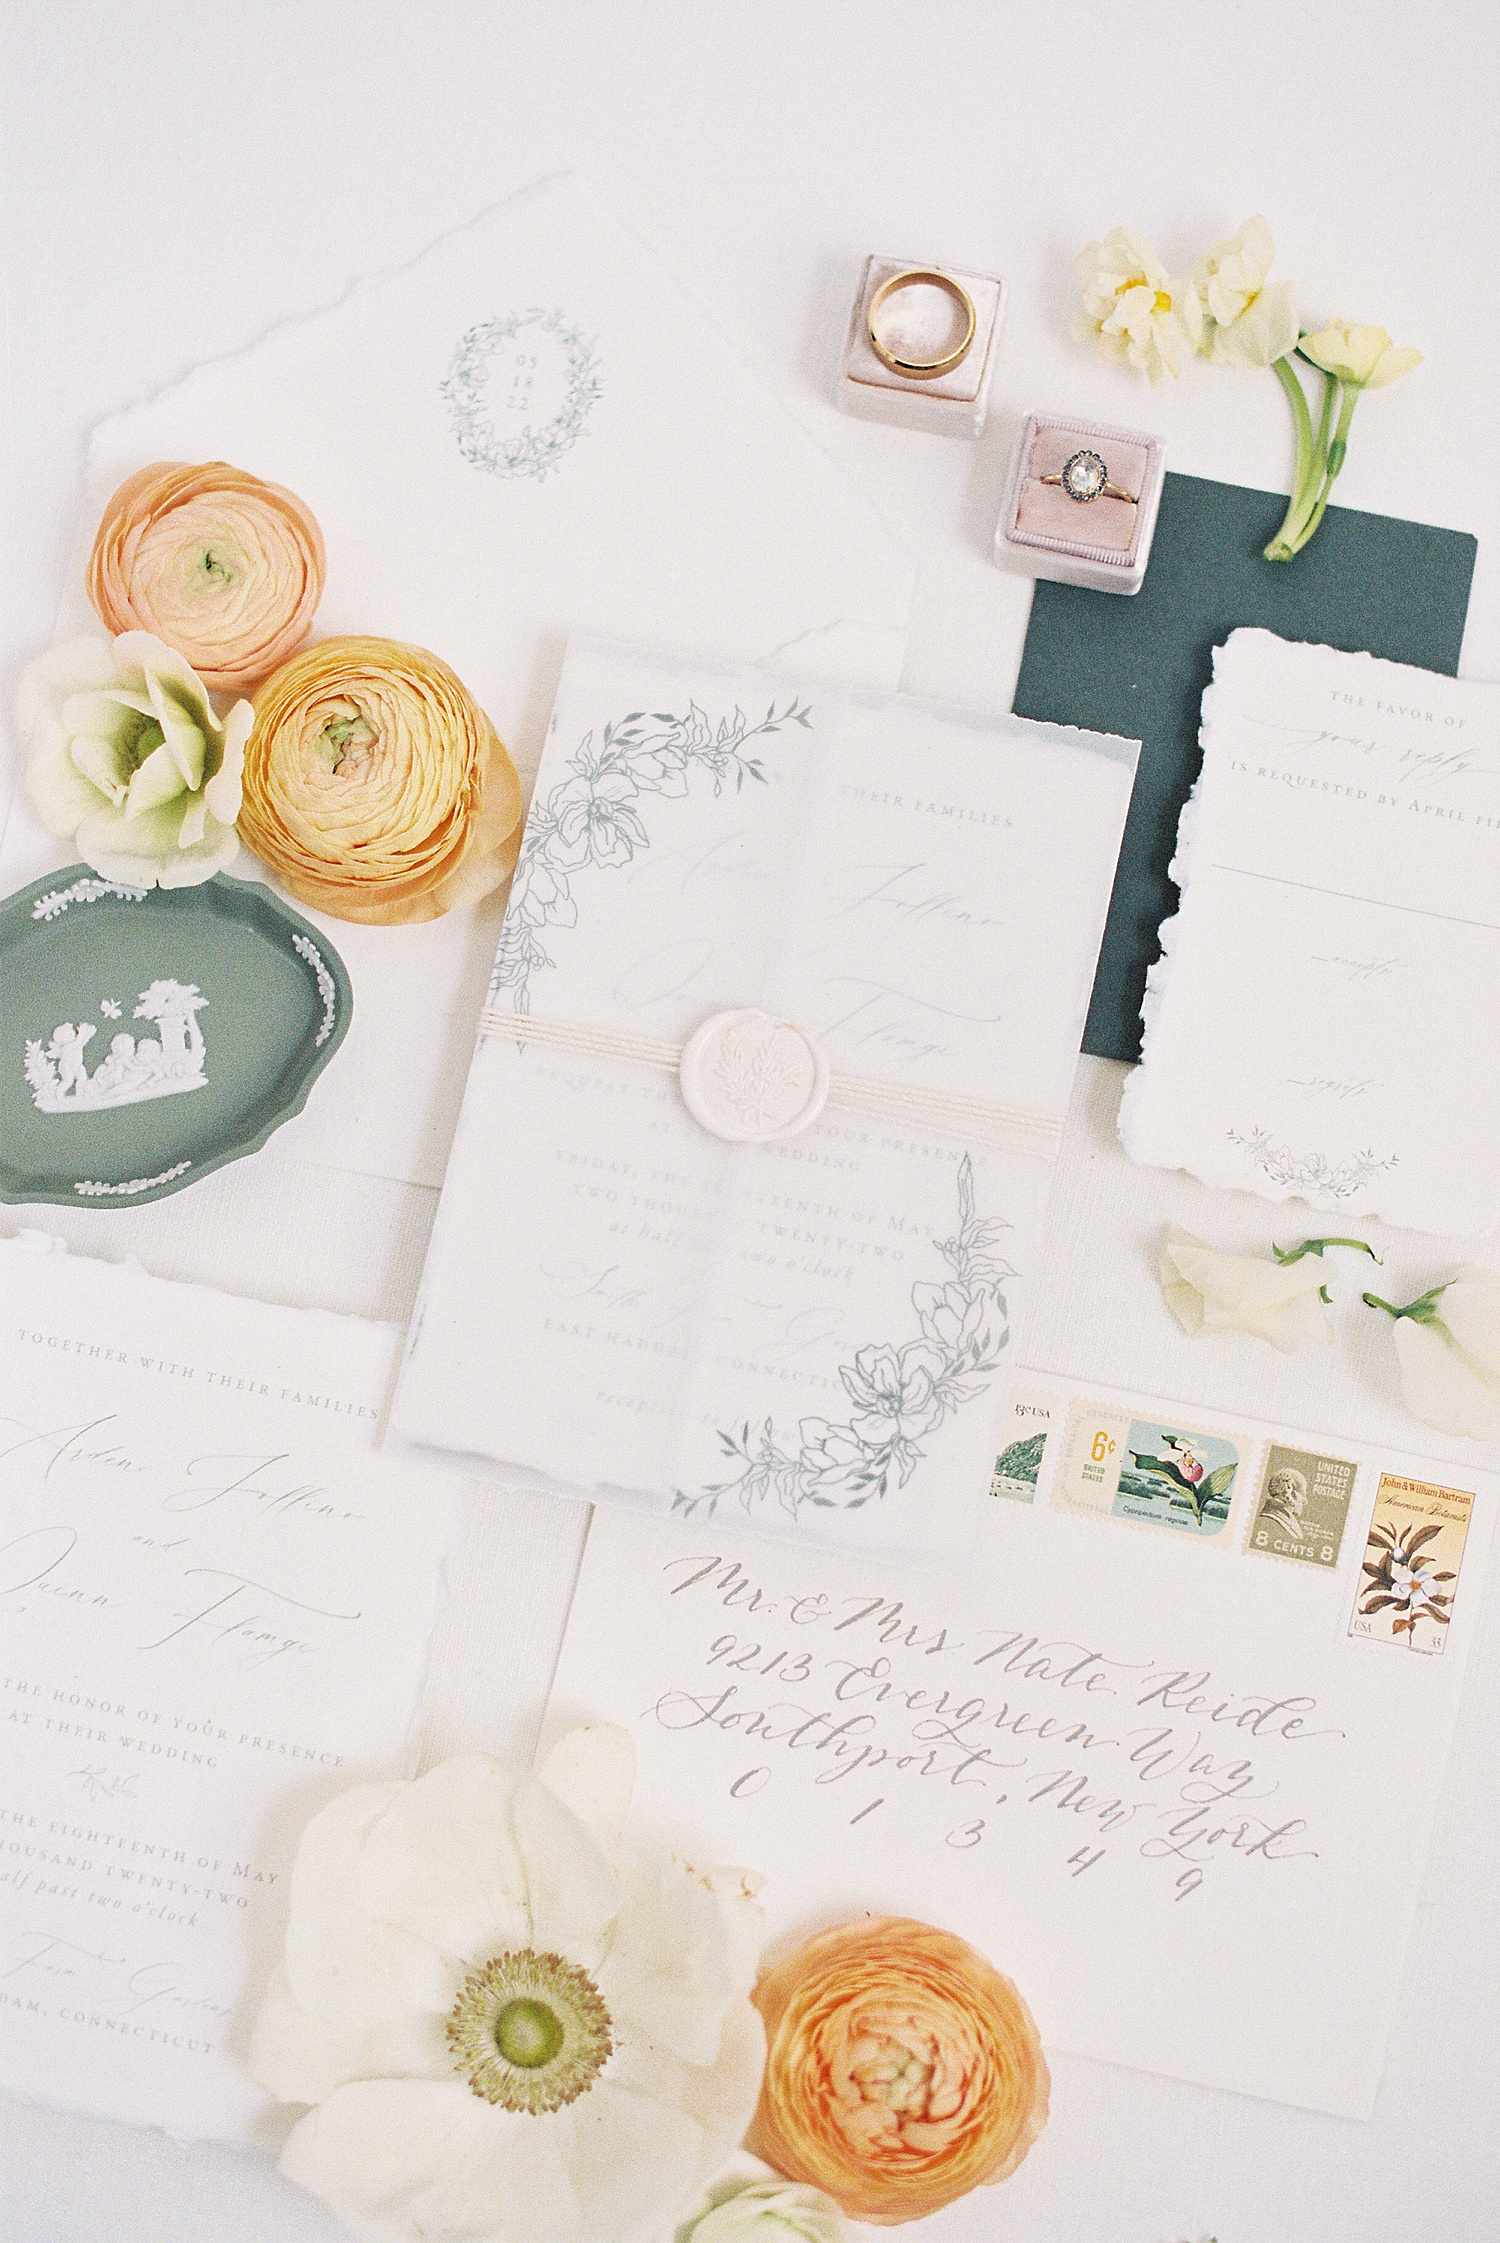 Invitation suite for romantic and whimsical wedding shoot